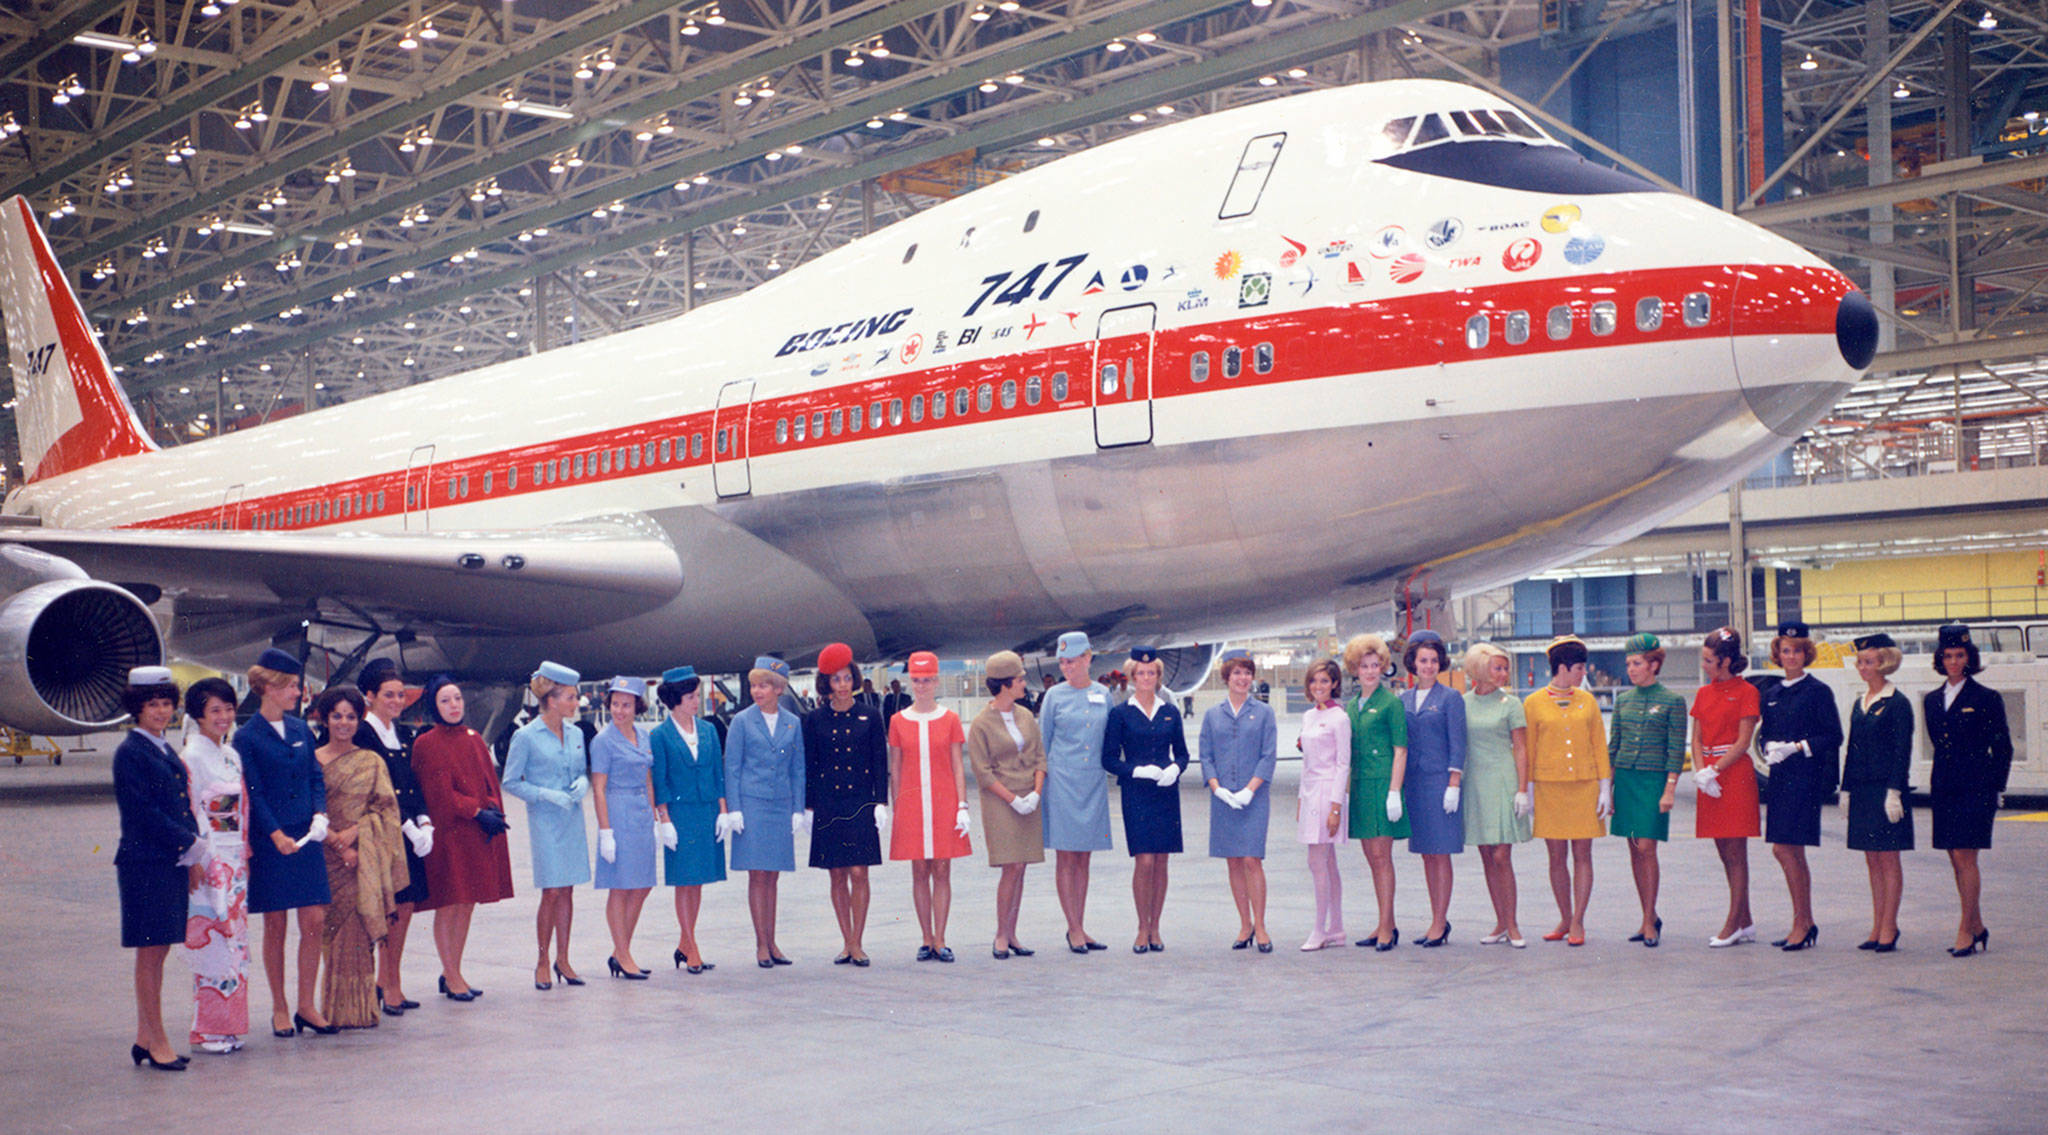 A Boeing 747 Jumbo Jet is seen in a hangar with 26 flight attendants representing 26 airliner standing in front of the airplane.